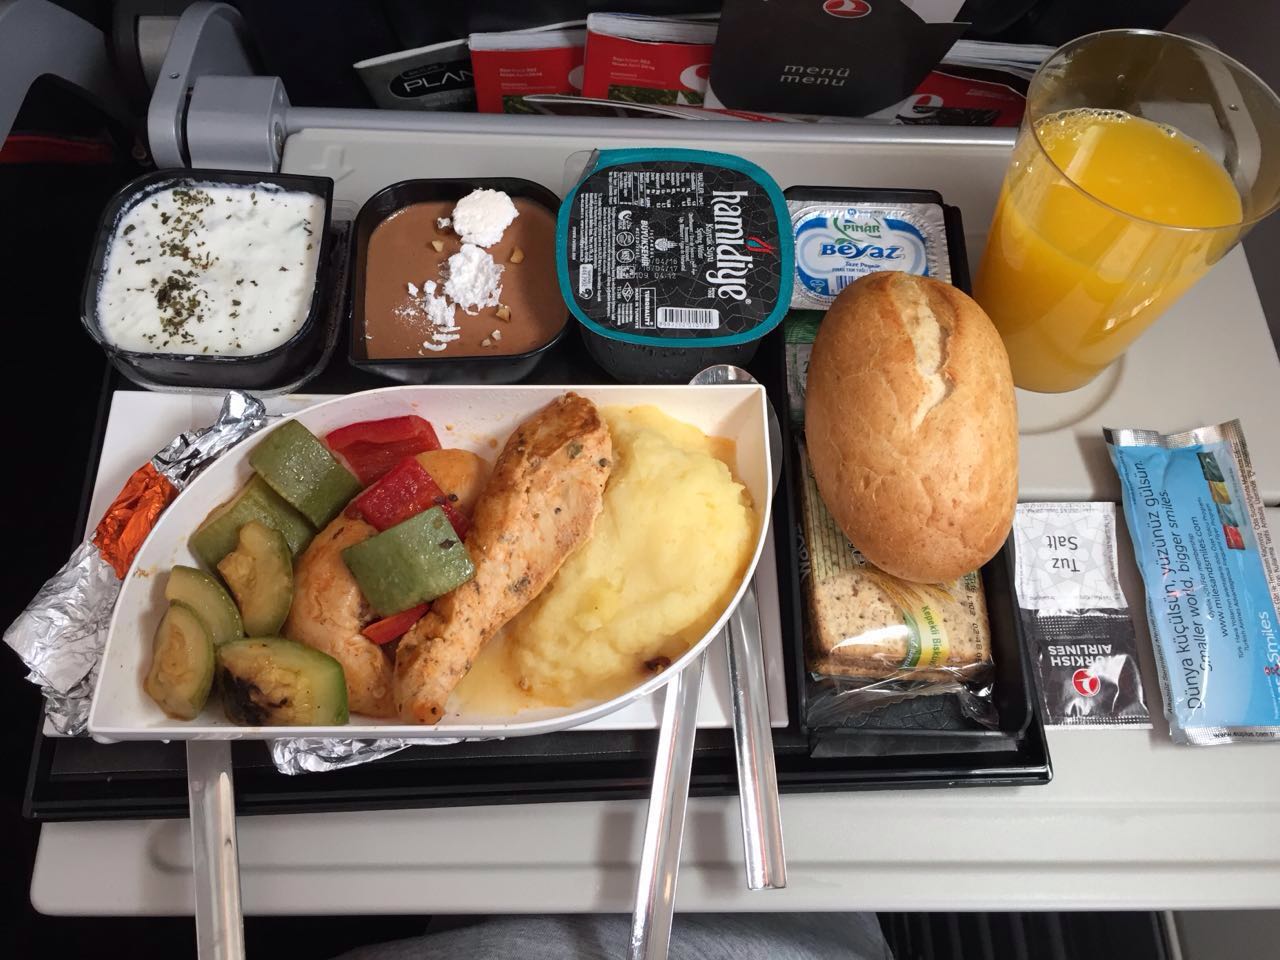 Turkish Airlines Inflight Meal (Istanbul-Malaga)